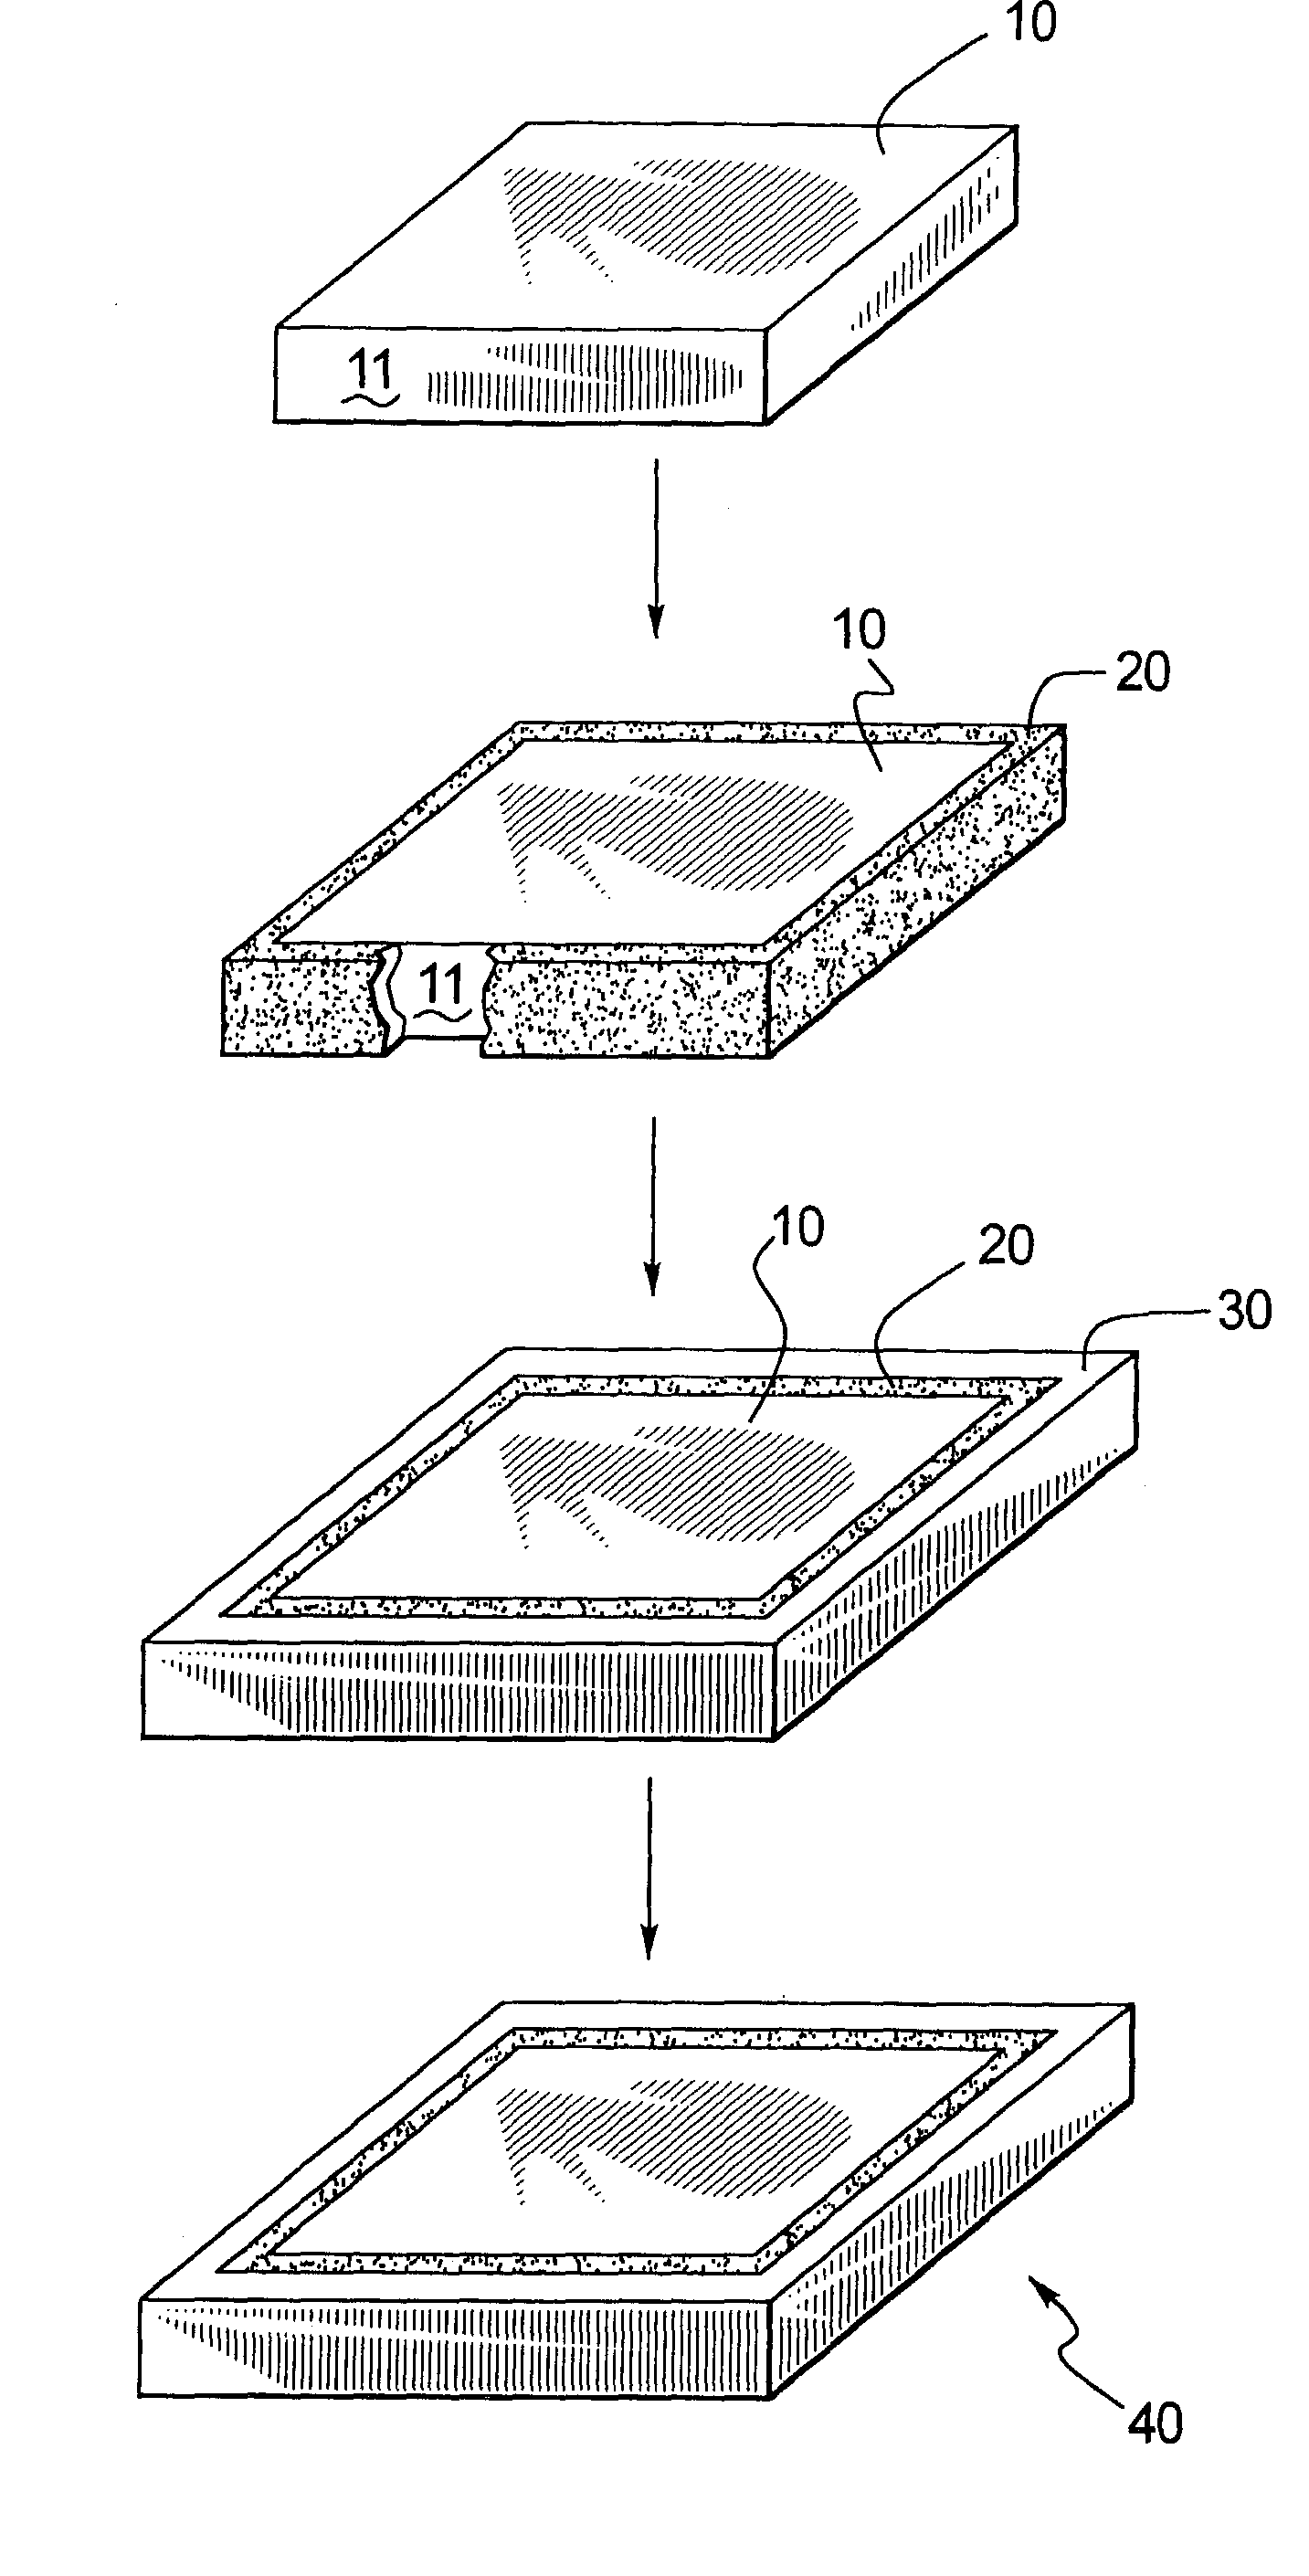 Method of manufacture of smart microfluidic medical device with universal coating